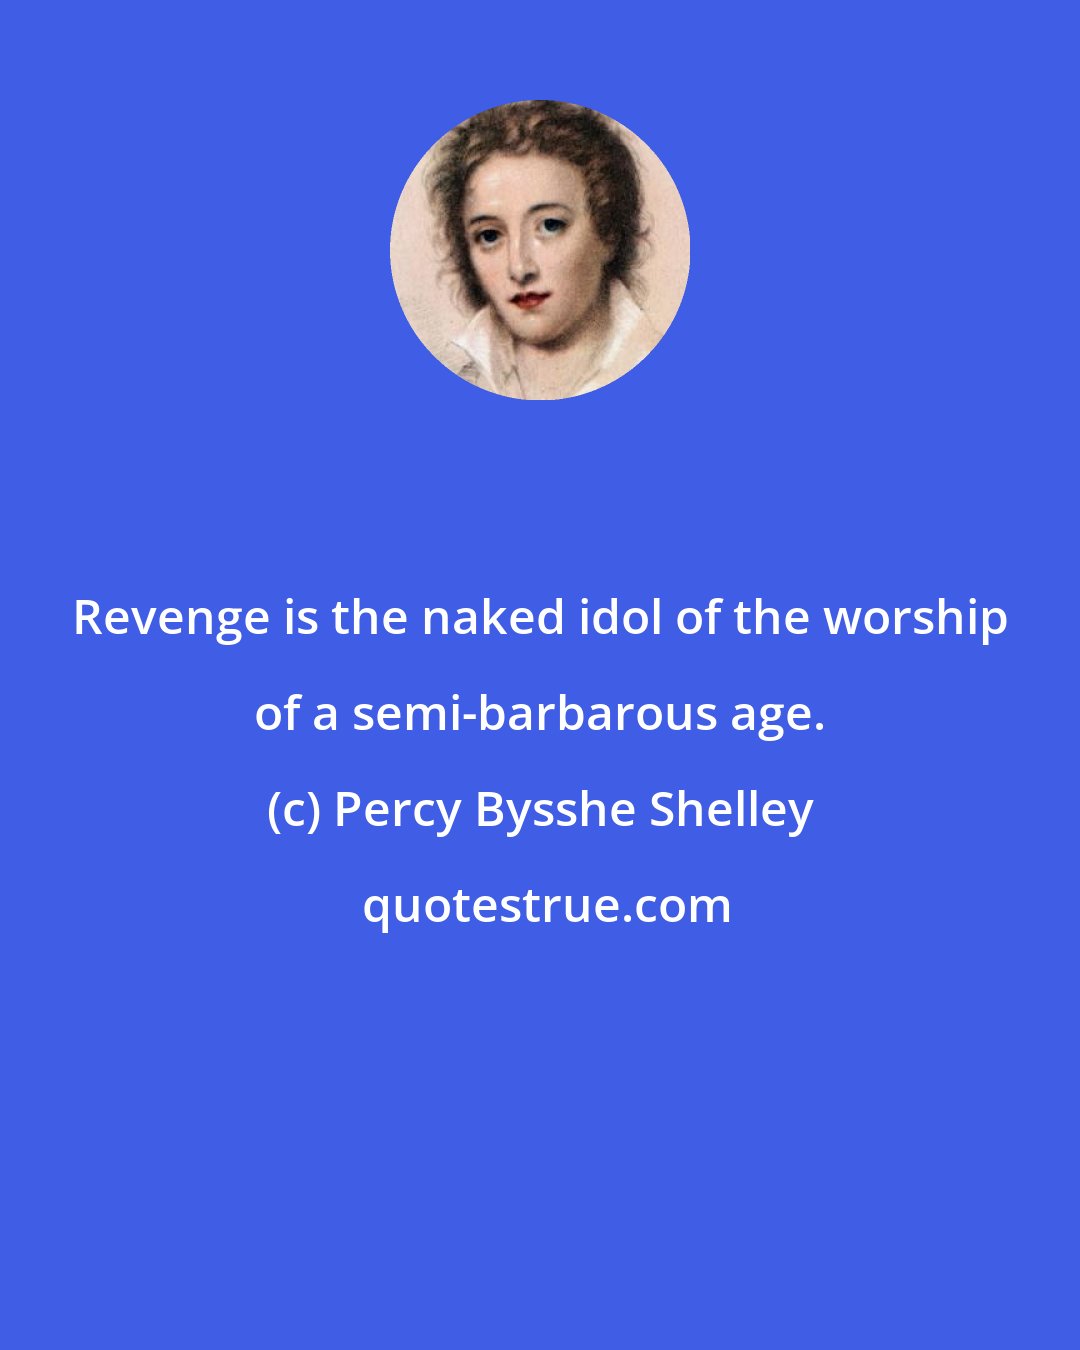 Percy Bysshe Shelley: Revenge is the naked idol of the worship of a semi-barbarous age.